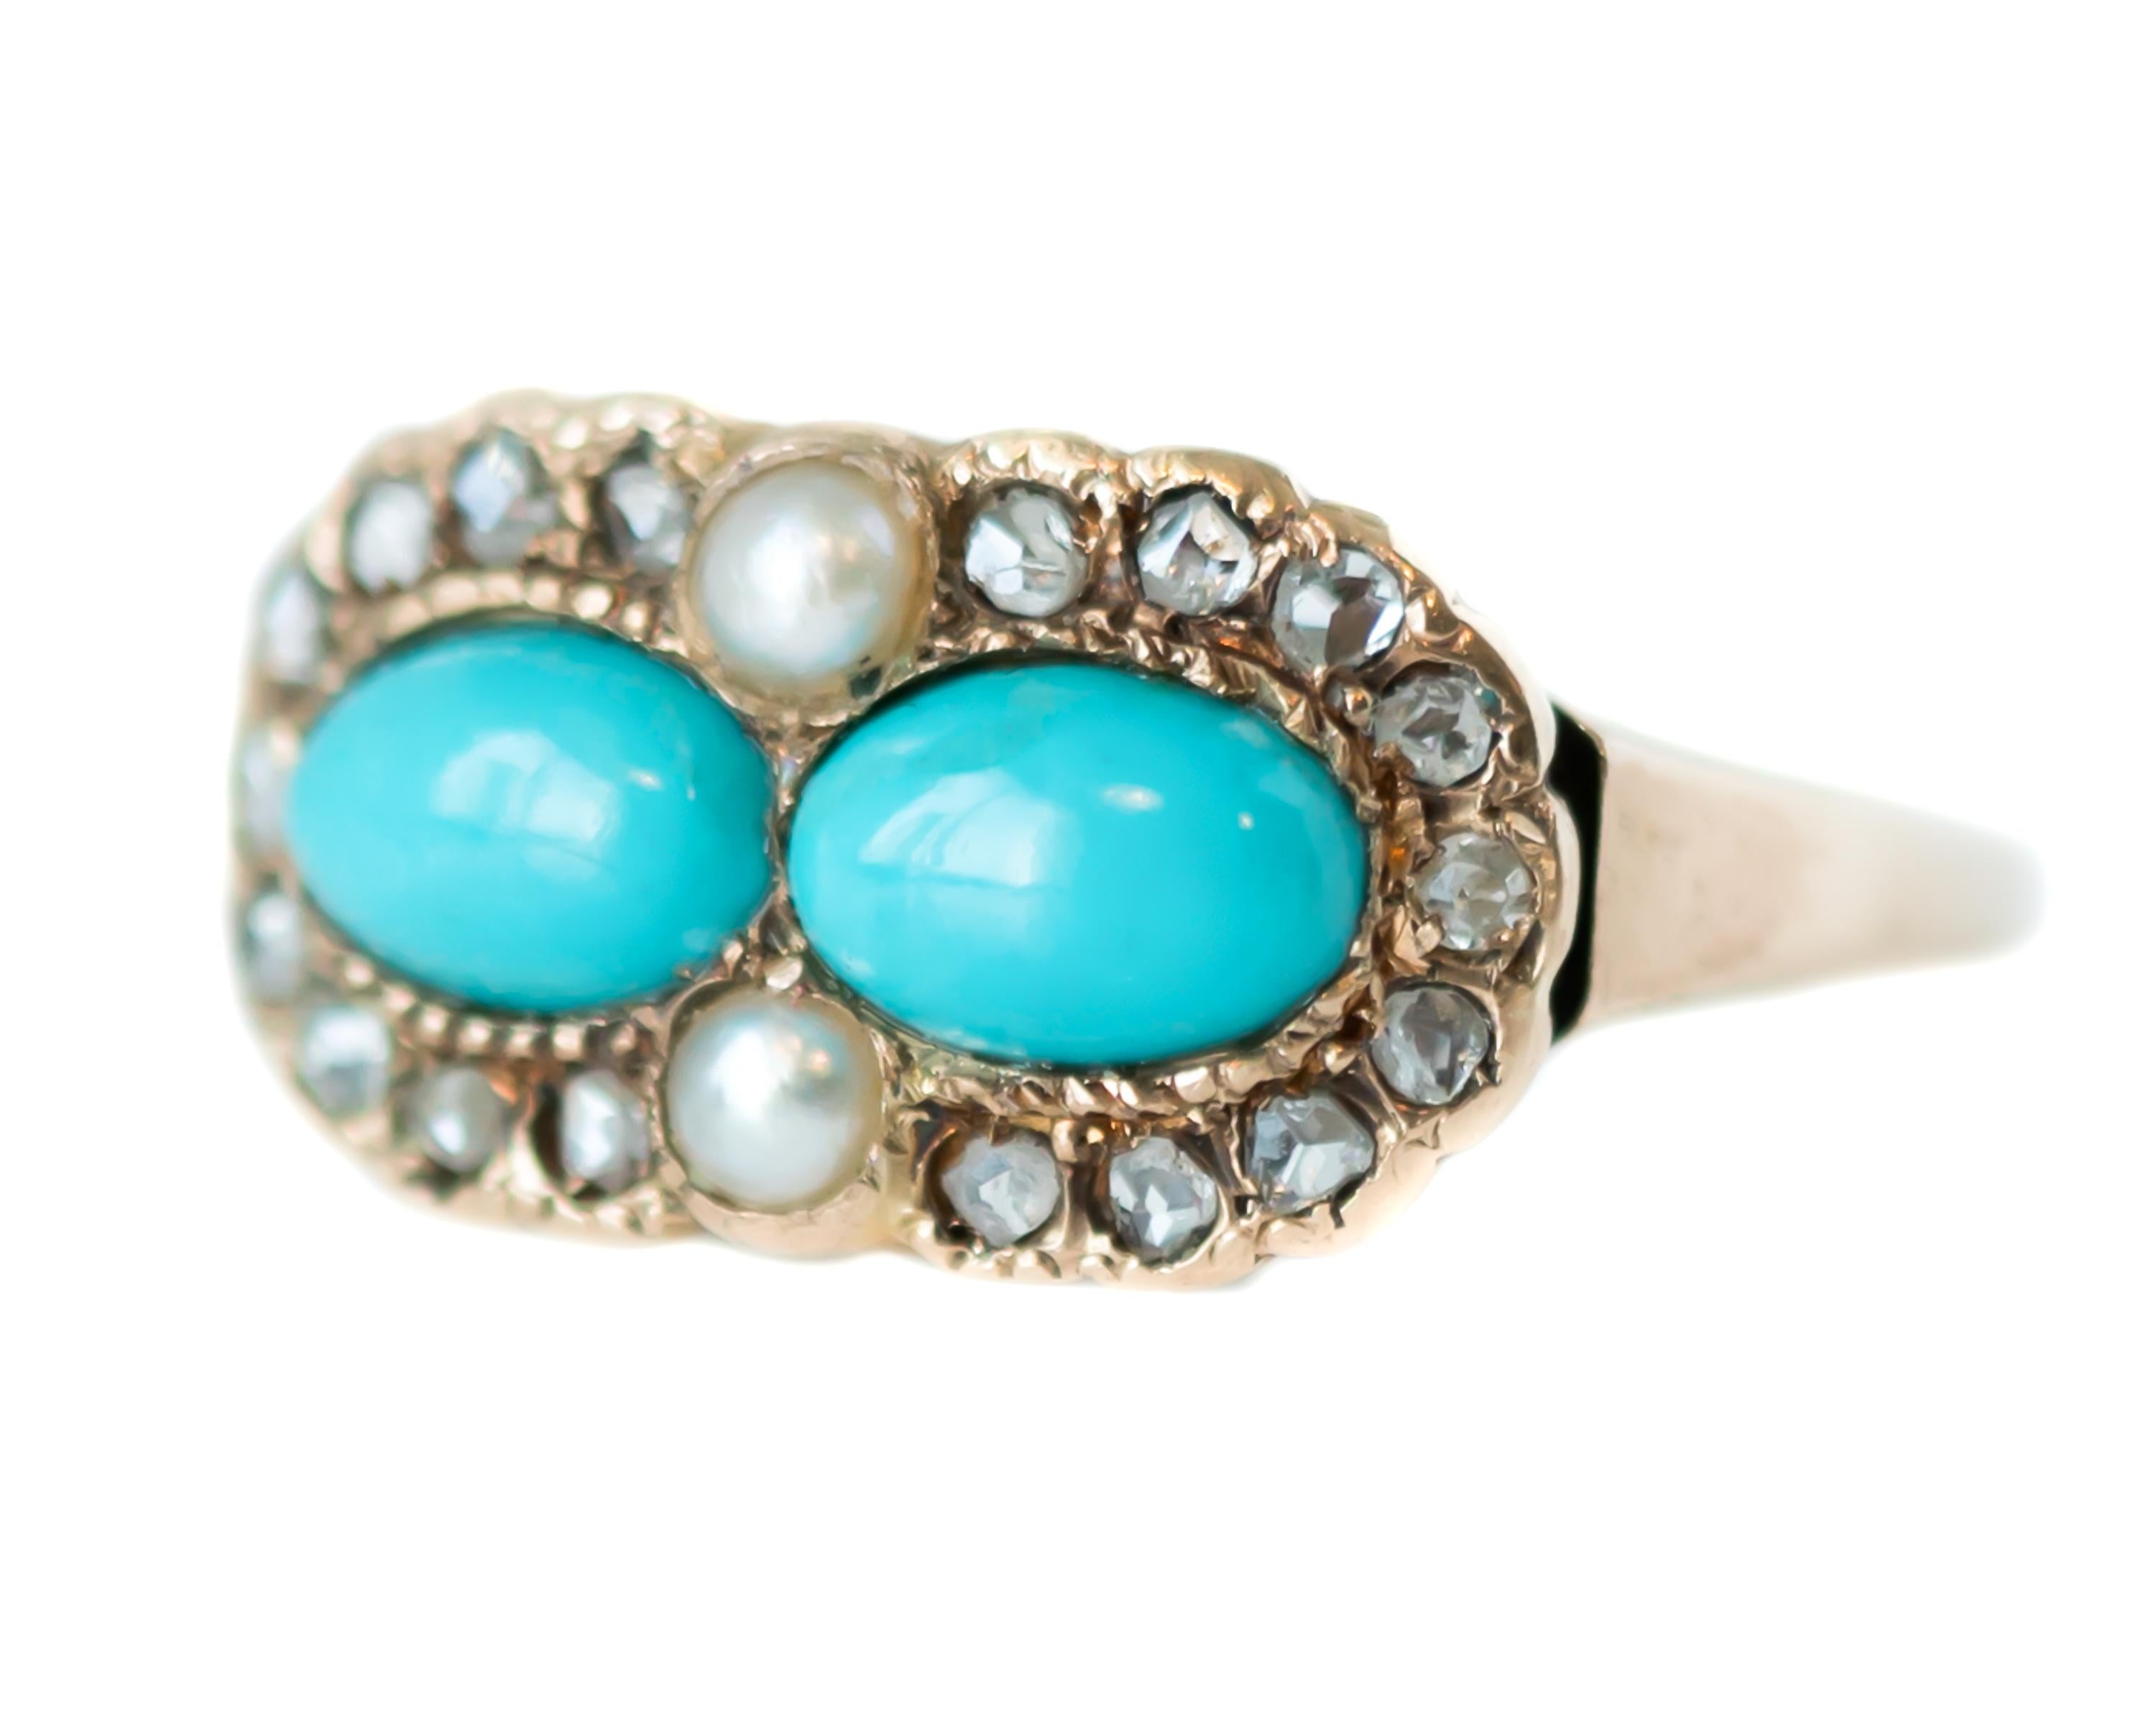 1880s Victorian Turquoise, Pearl, Diamond and 9 Karat Yellow Gold Ring 1